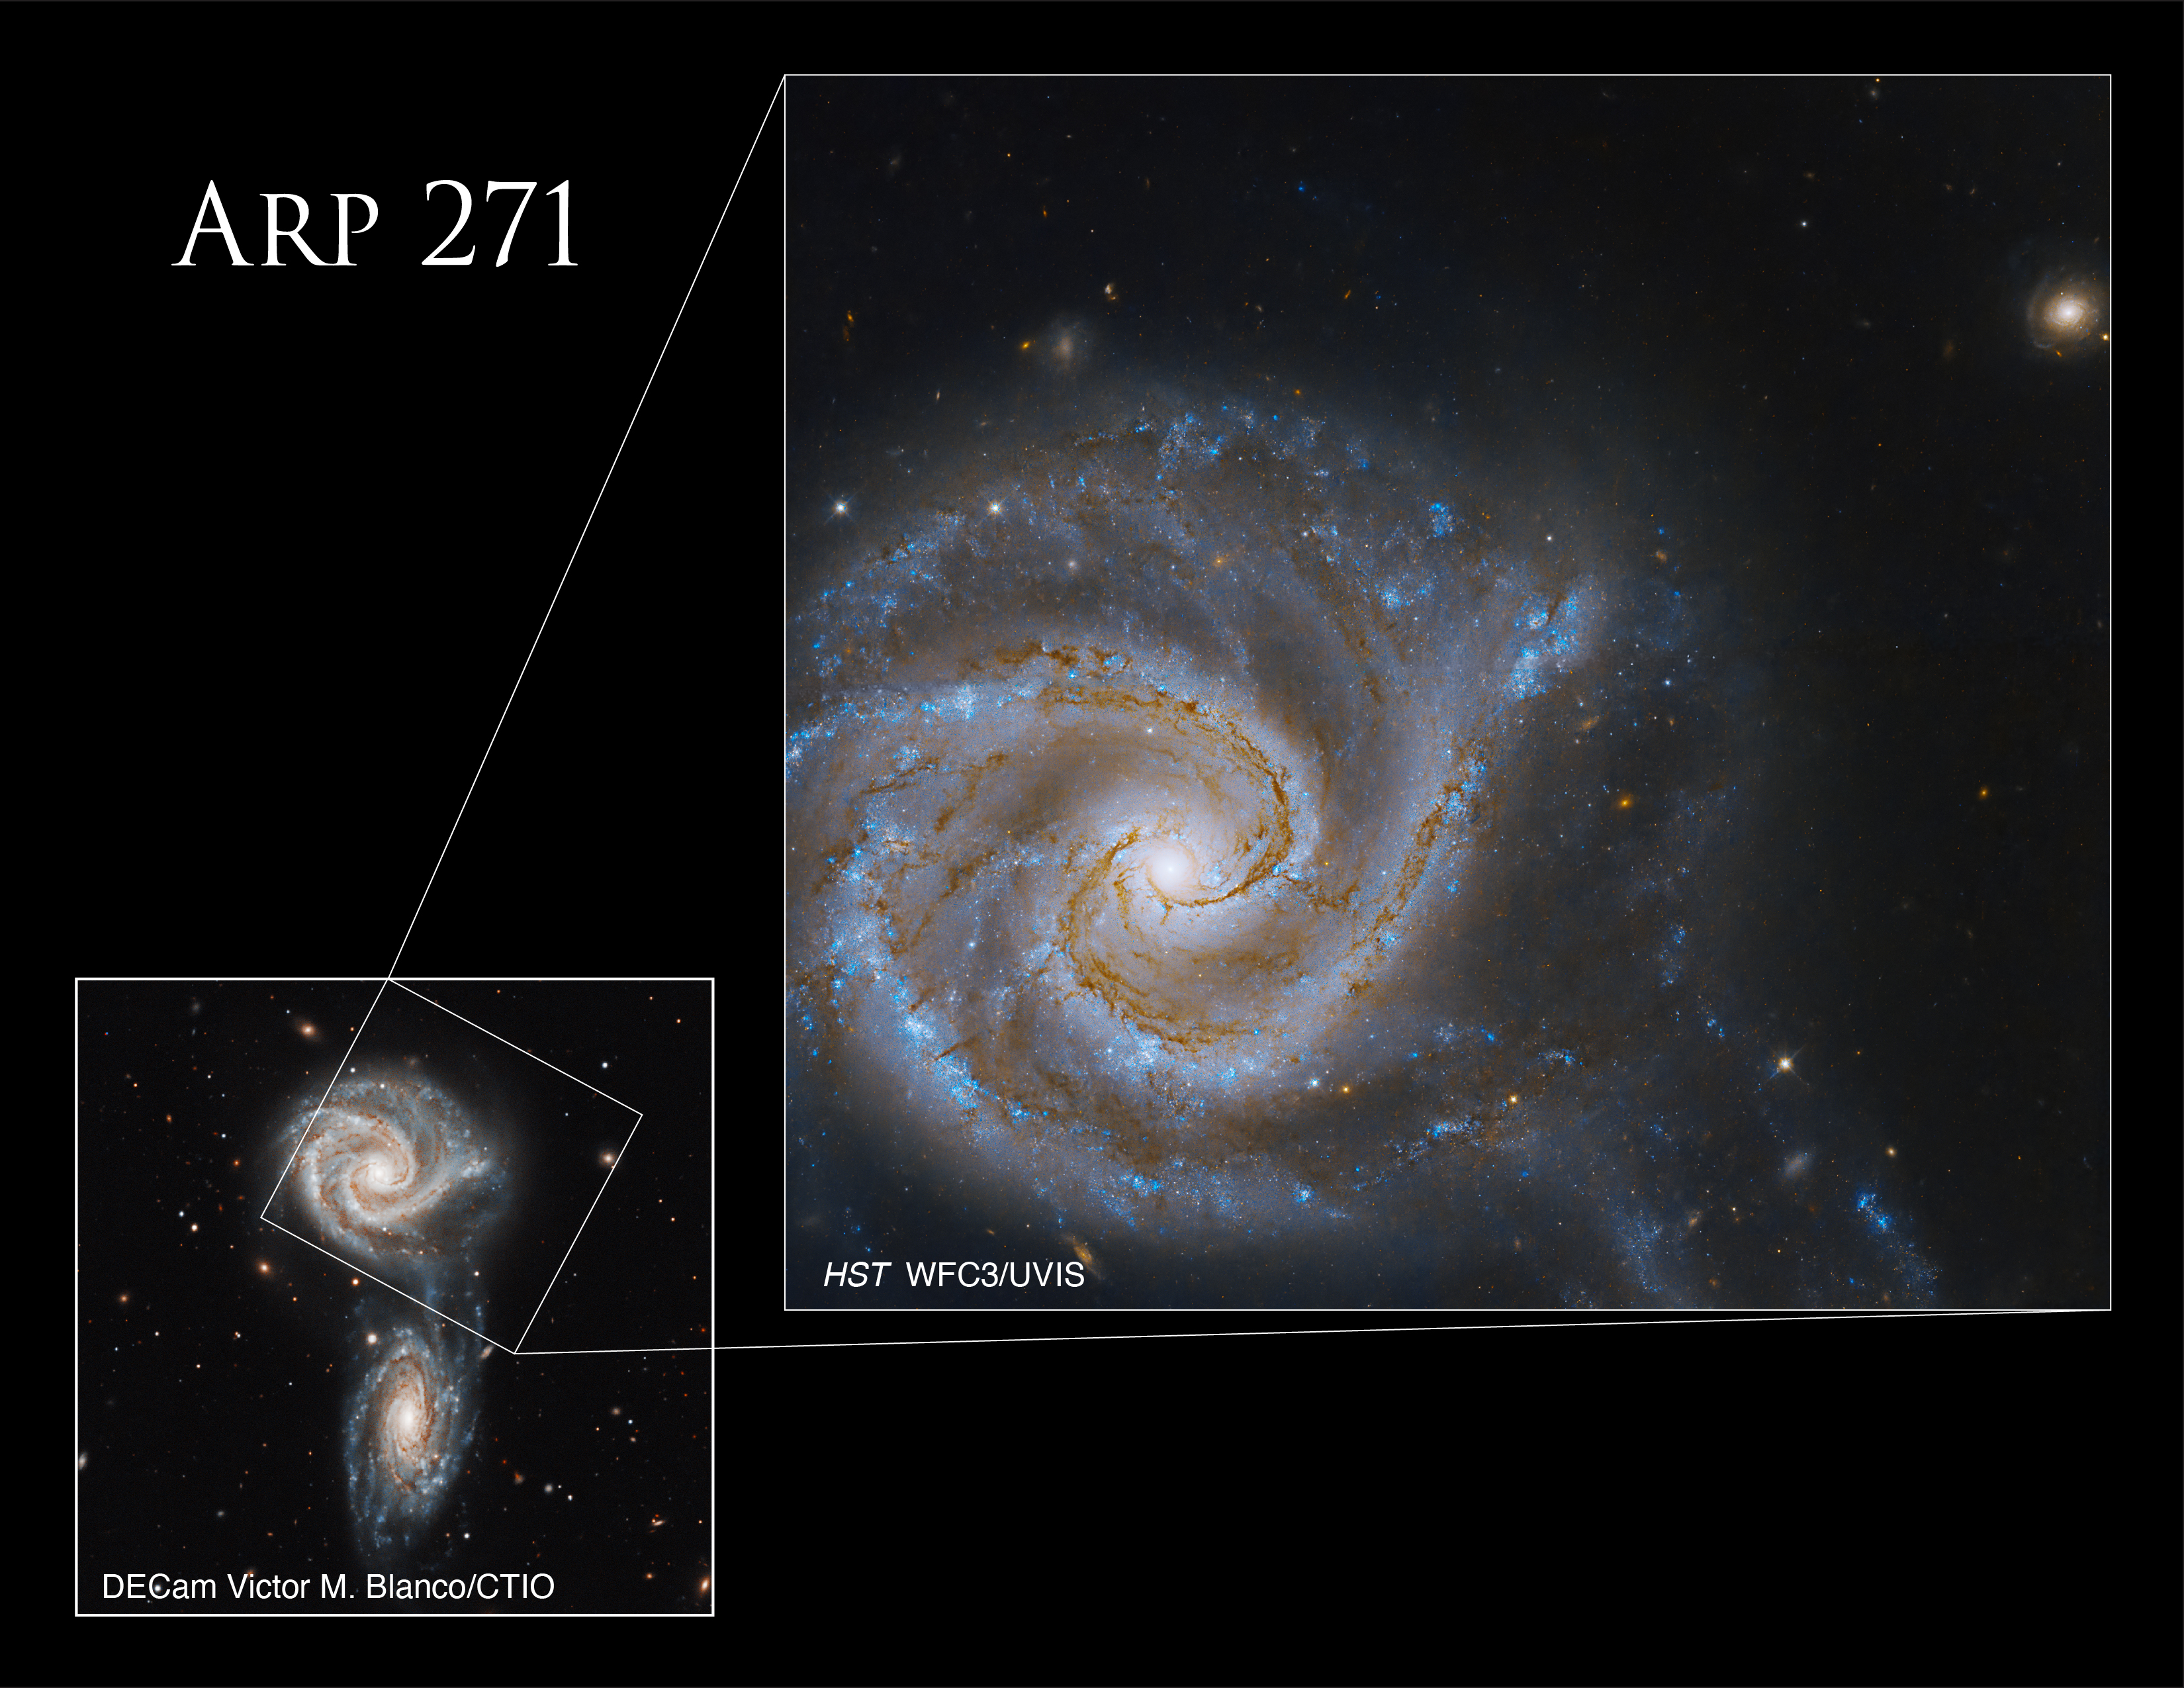 The rightmost image in this inset graphic shows a massive spiral galaxy. To its left, white text reads “Arp 271” and a more zoomed-out image below shows two interacting spiral galaxies with a white box designating the portion that is the rightmost image.